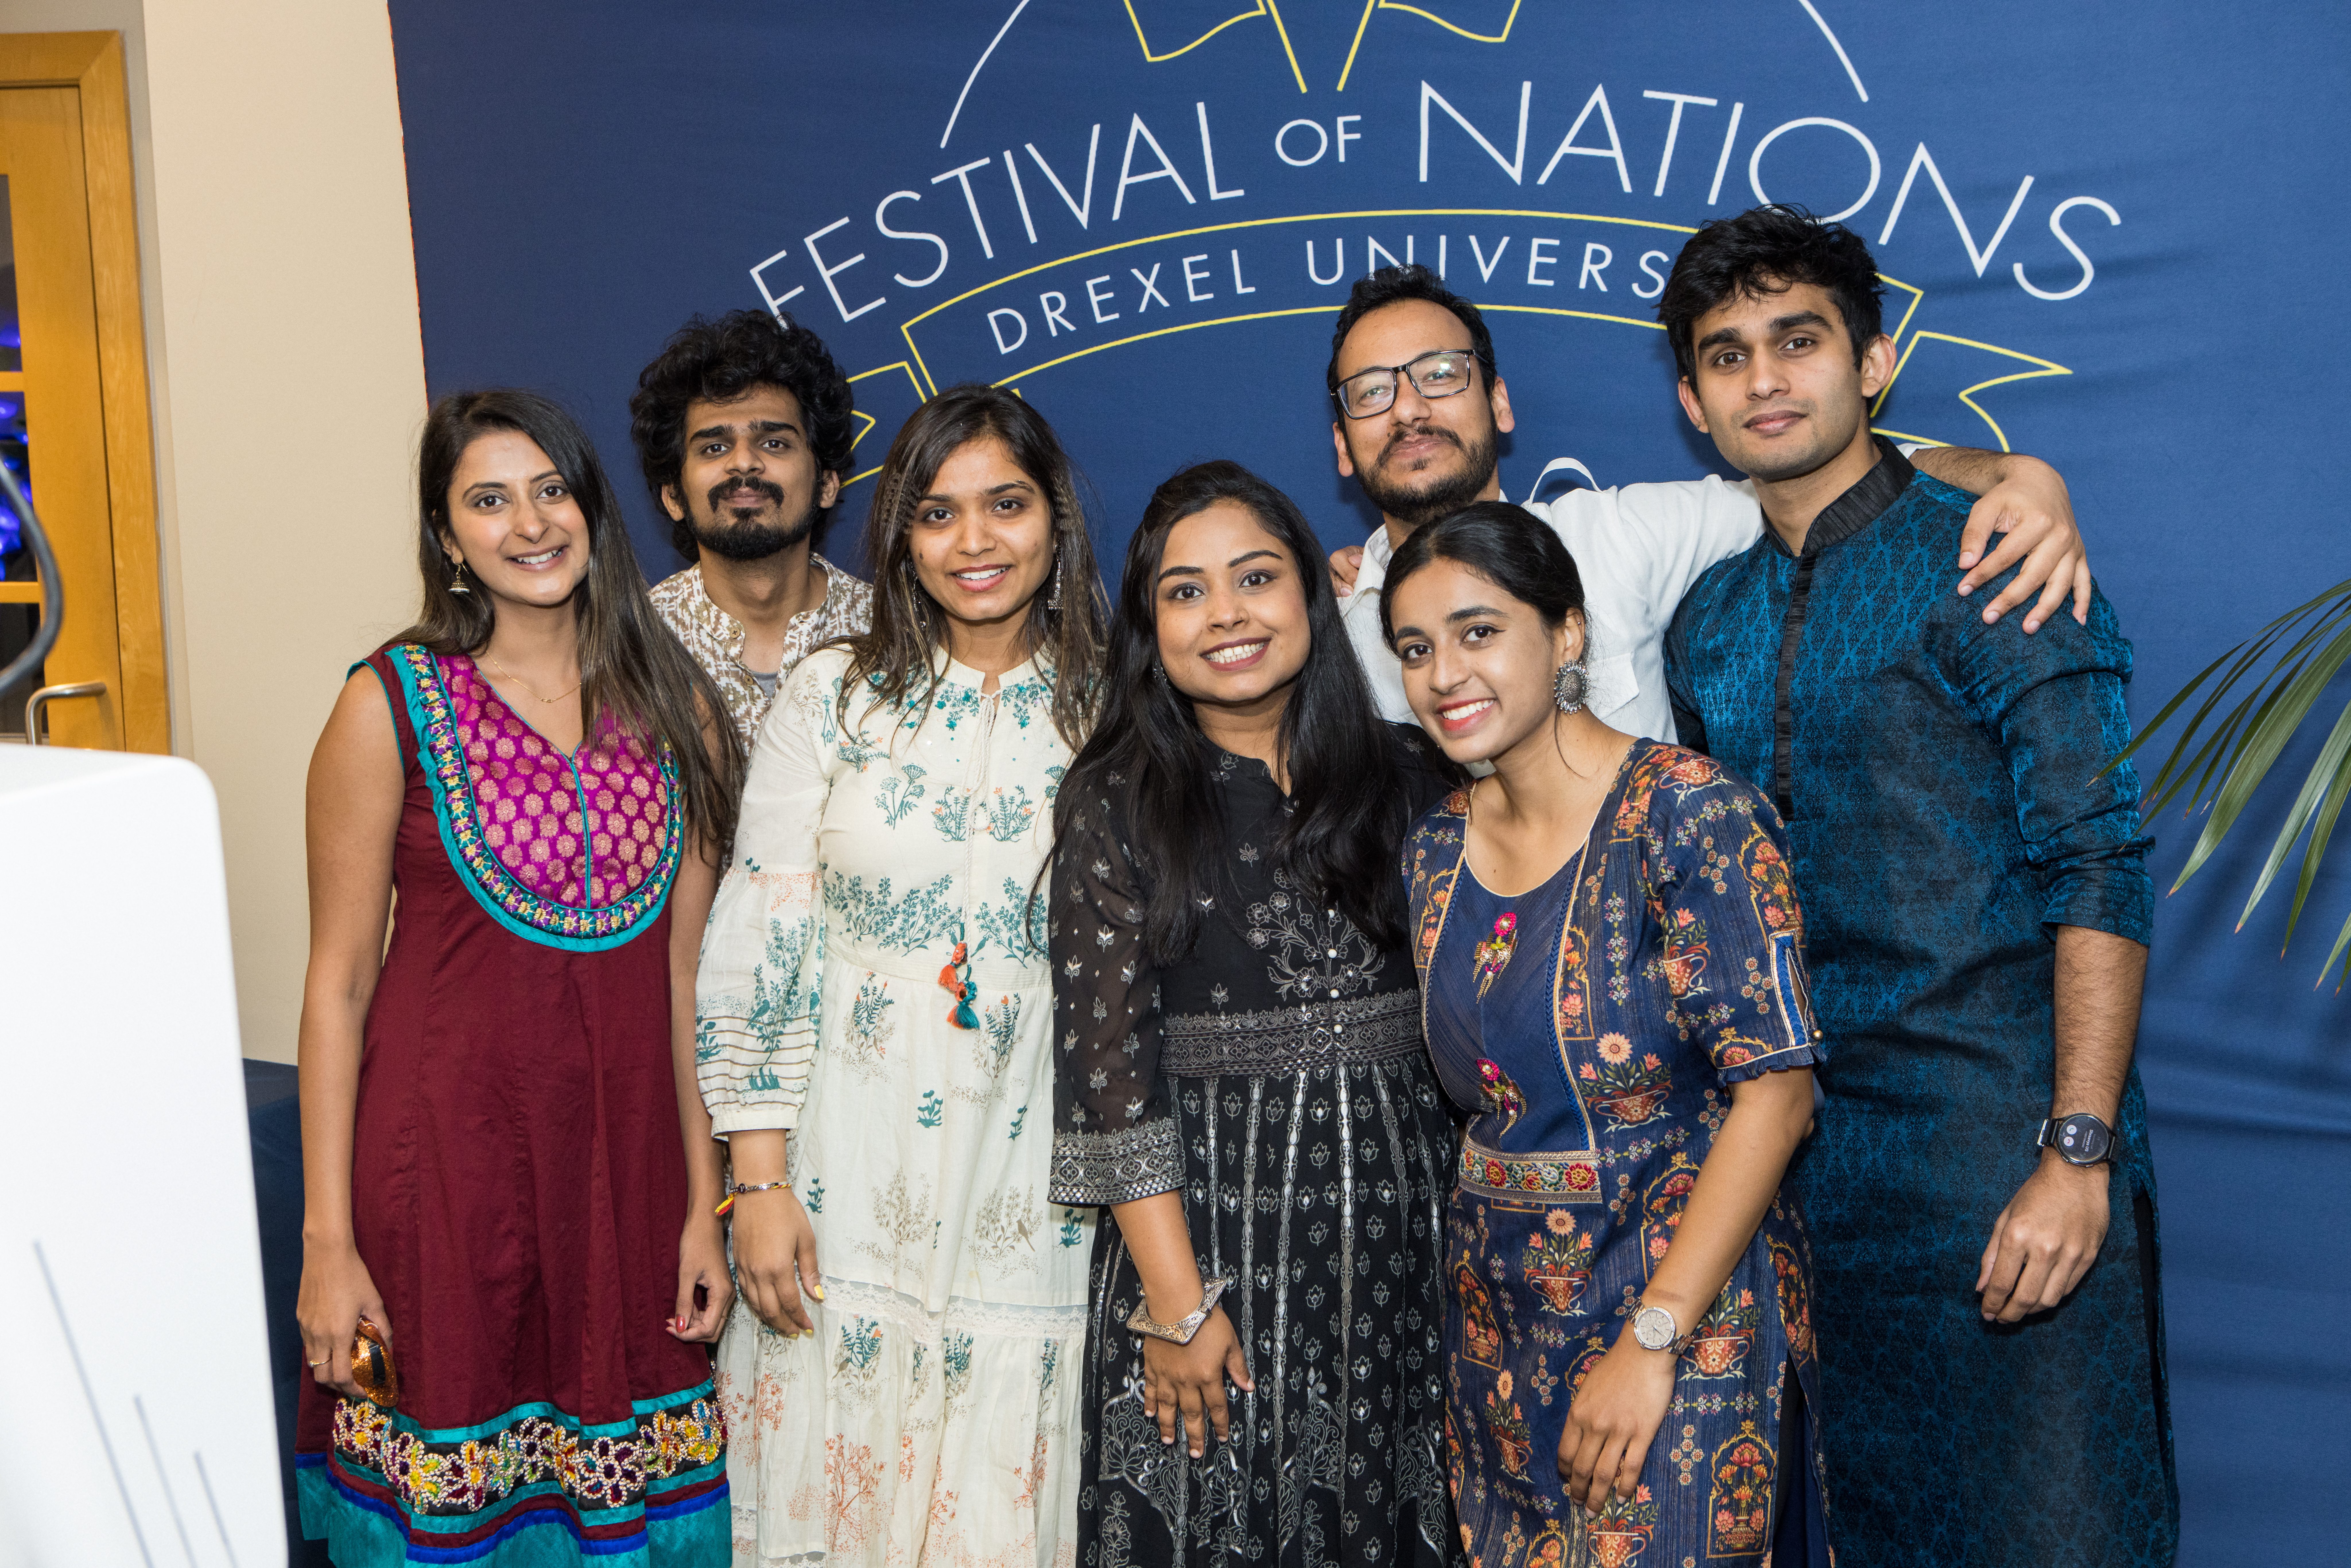 Members of the 2022/2023 IGSA Board at Festival of Nations